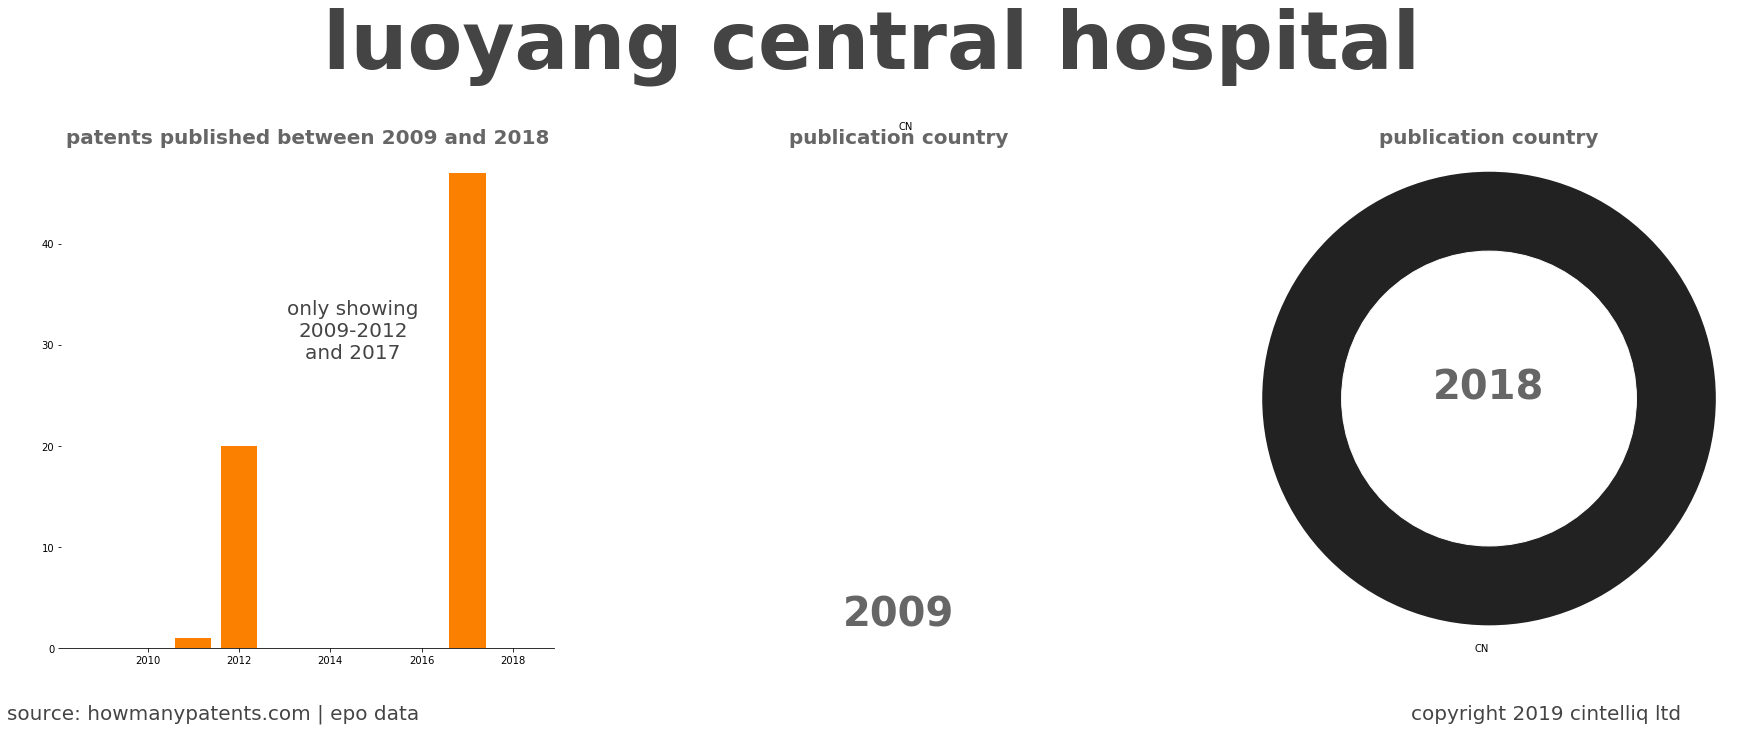 summary of patents for Luoyang Central Hospital